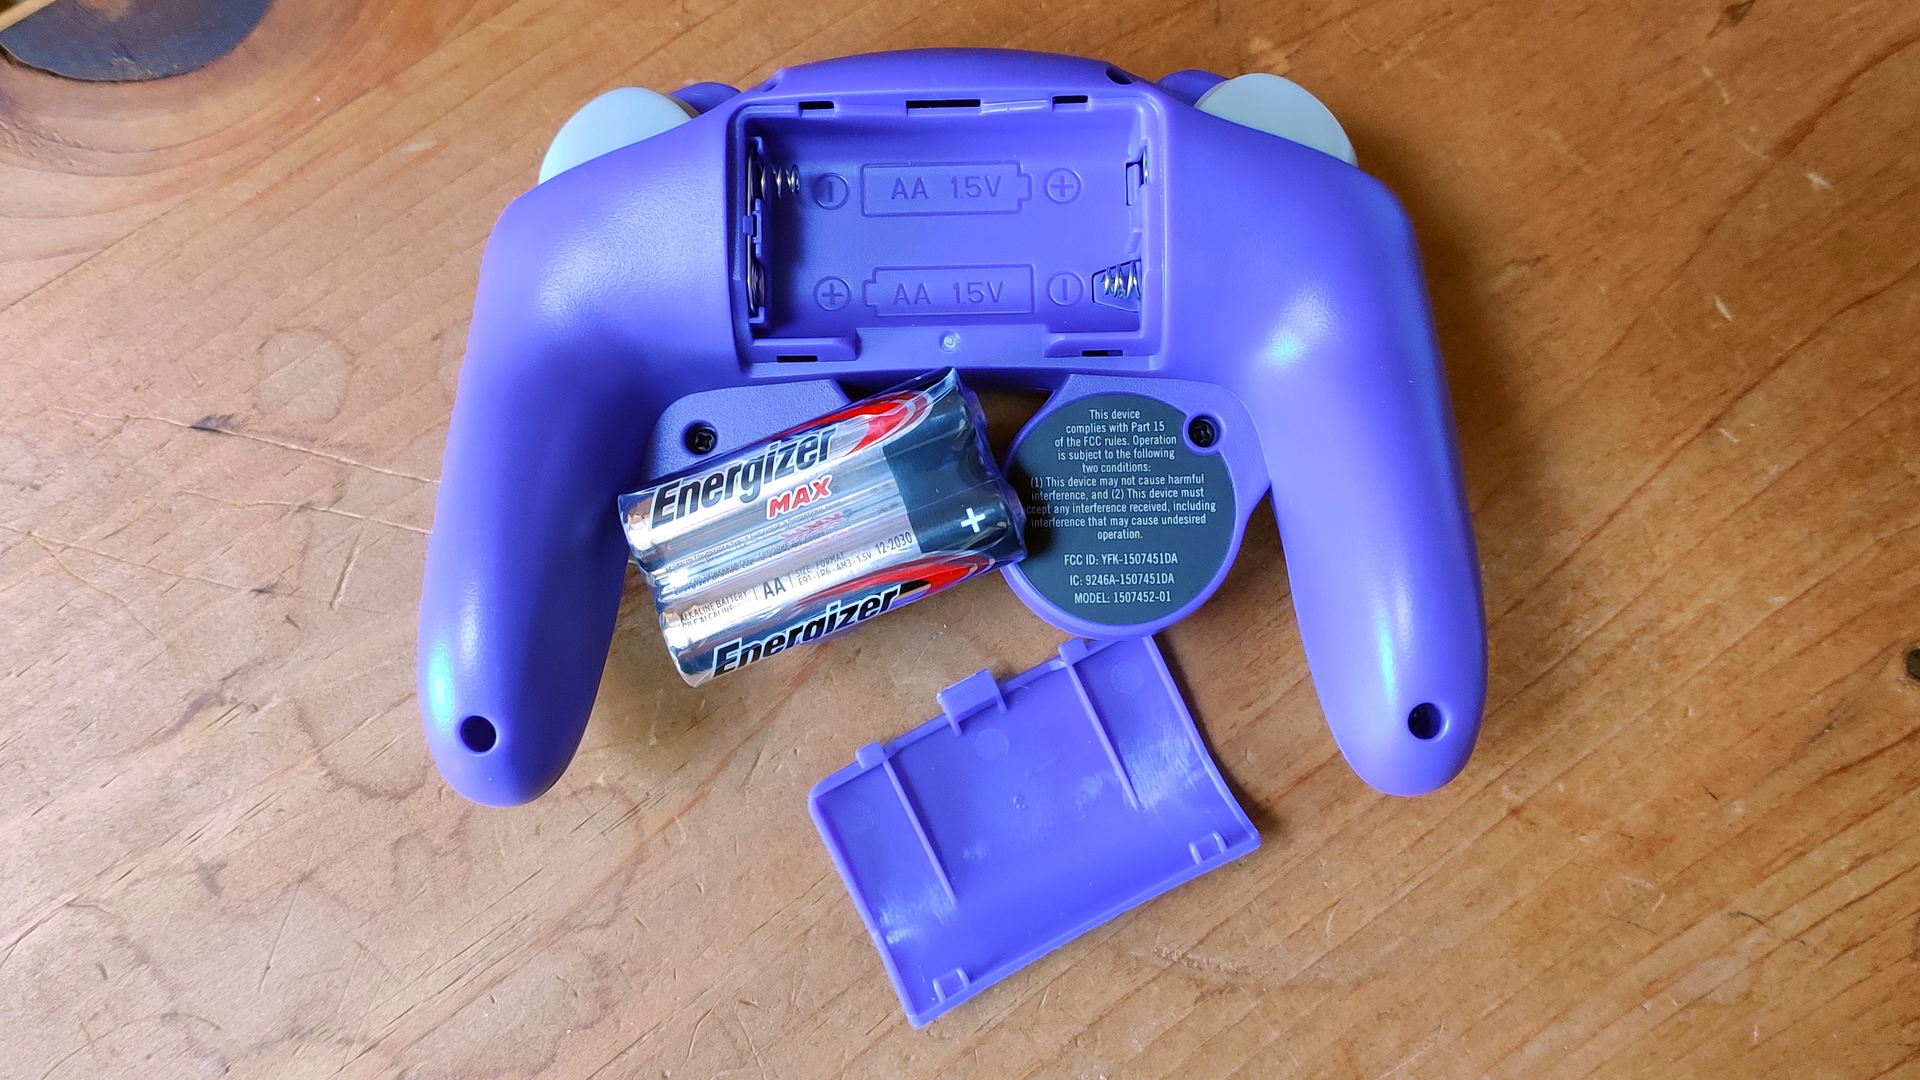 PowerA GameCube Wireless Controller for Nintendo Switch Review Controller Bottom with Batteries